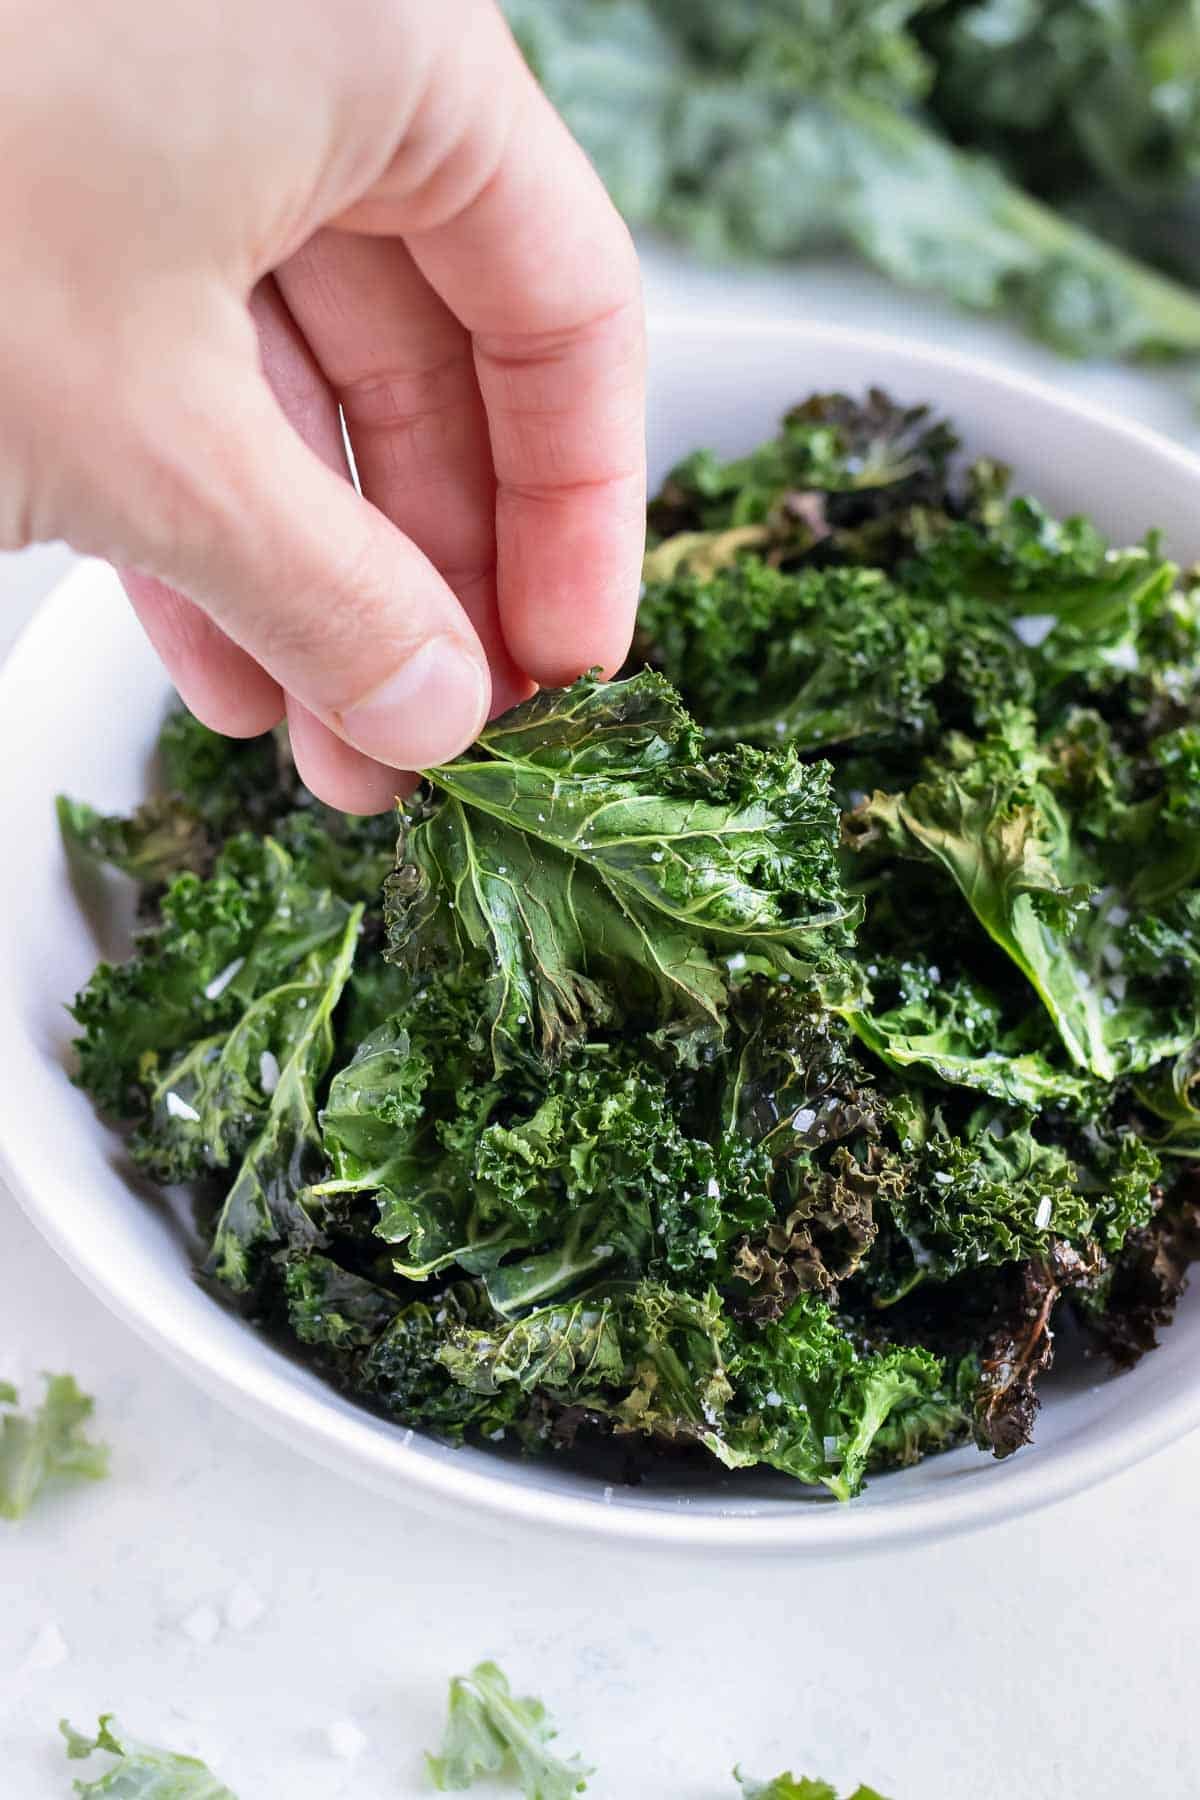 Air fryer kale chips are lifted out of a white bowl from the counter.